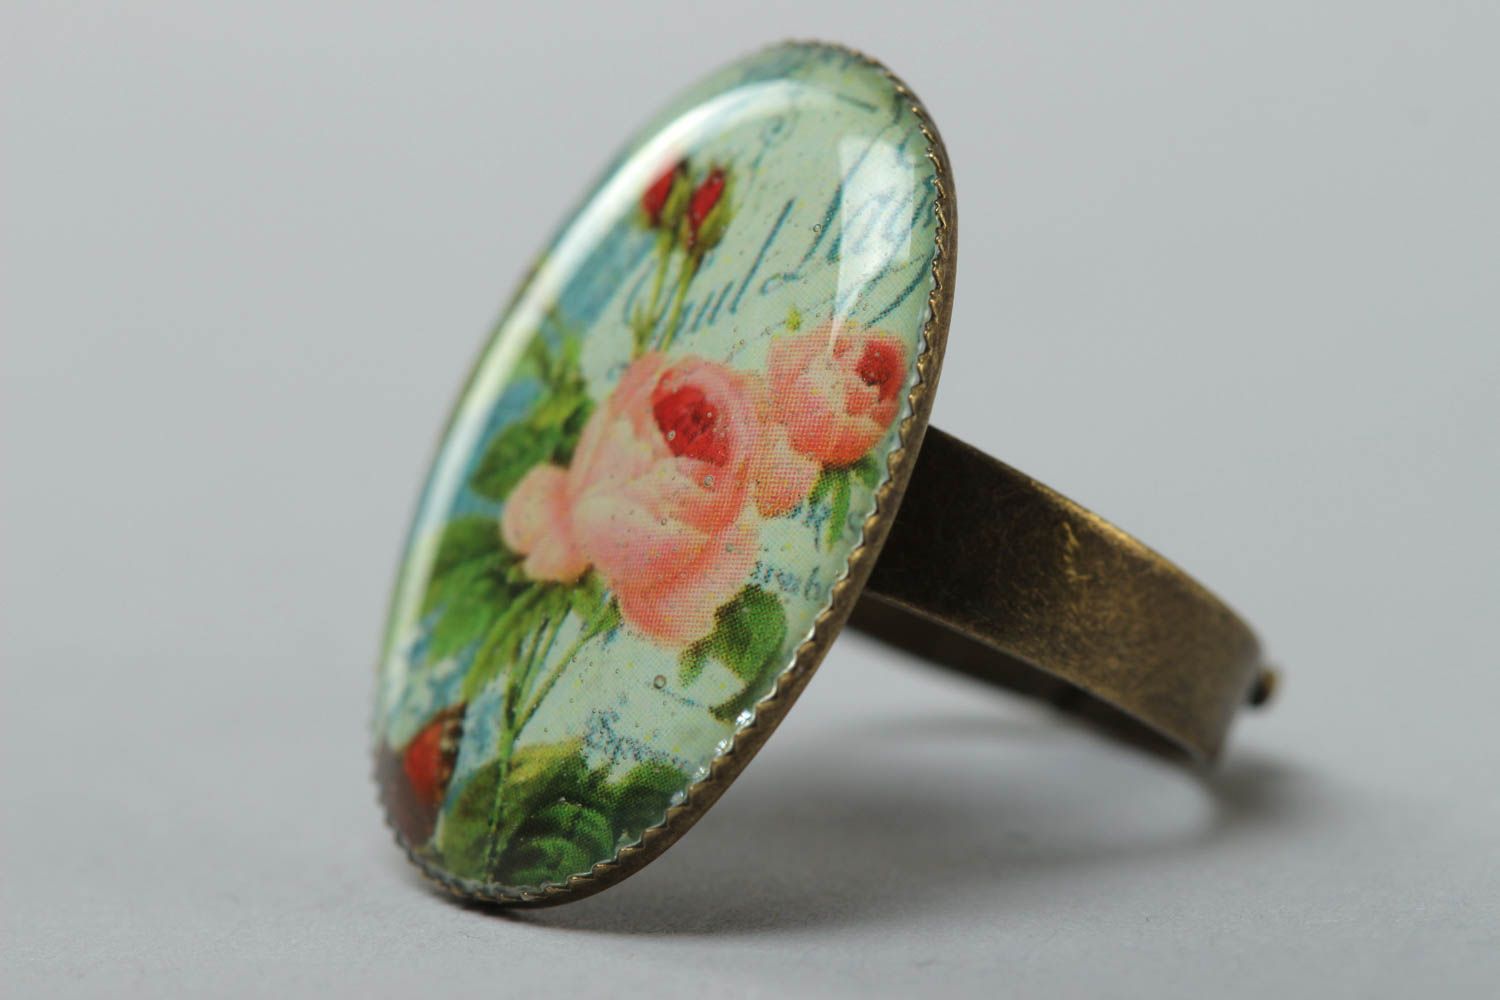 Handmade jewelry ring with metal basis and rose image coated with glass glaze photo 2